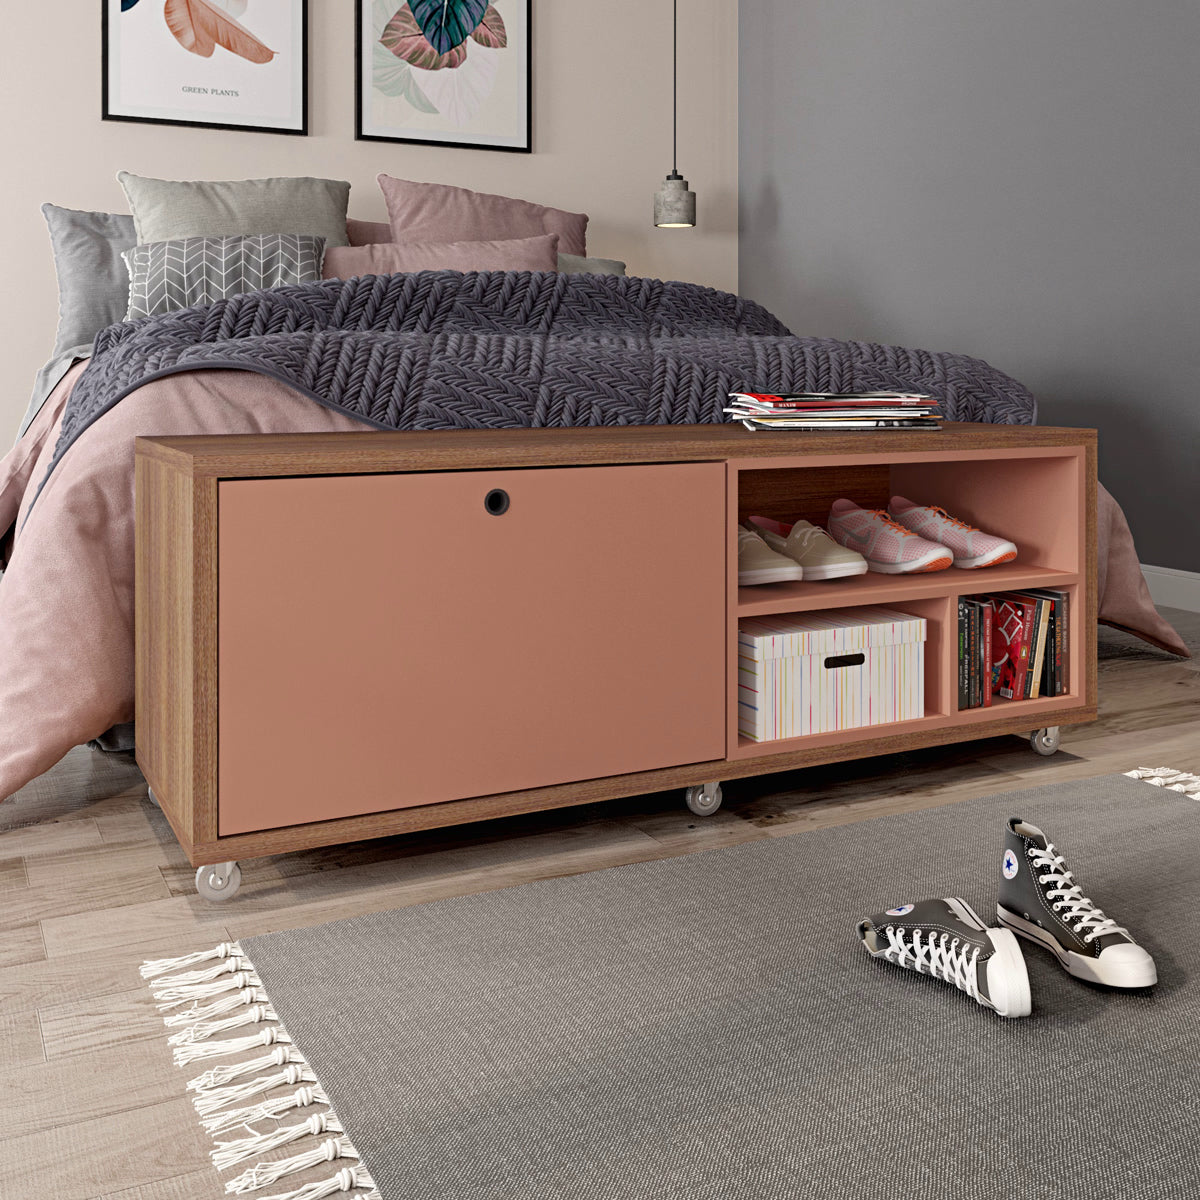 Manhattan Comfort Windsor 53.62 Modern Shoe Rack Bed Bench with Silicon Casters in Ceramic Pink and Nature